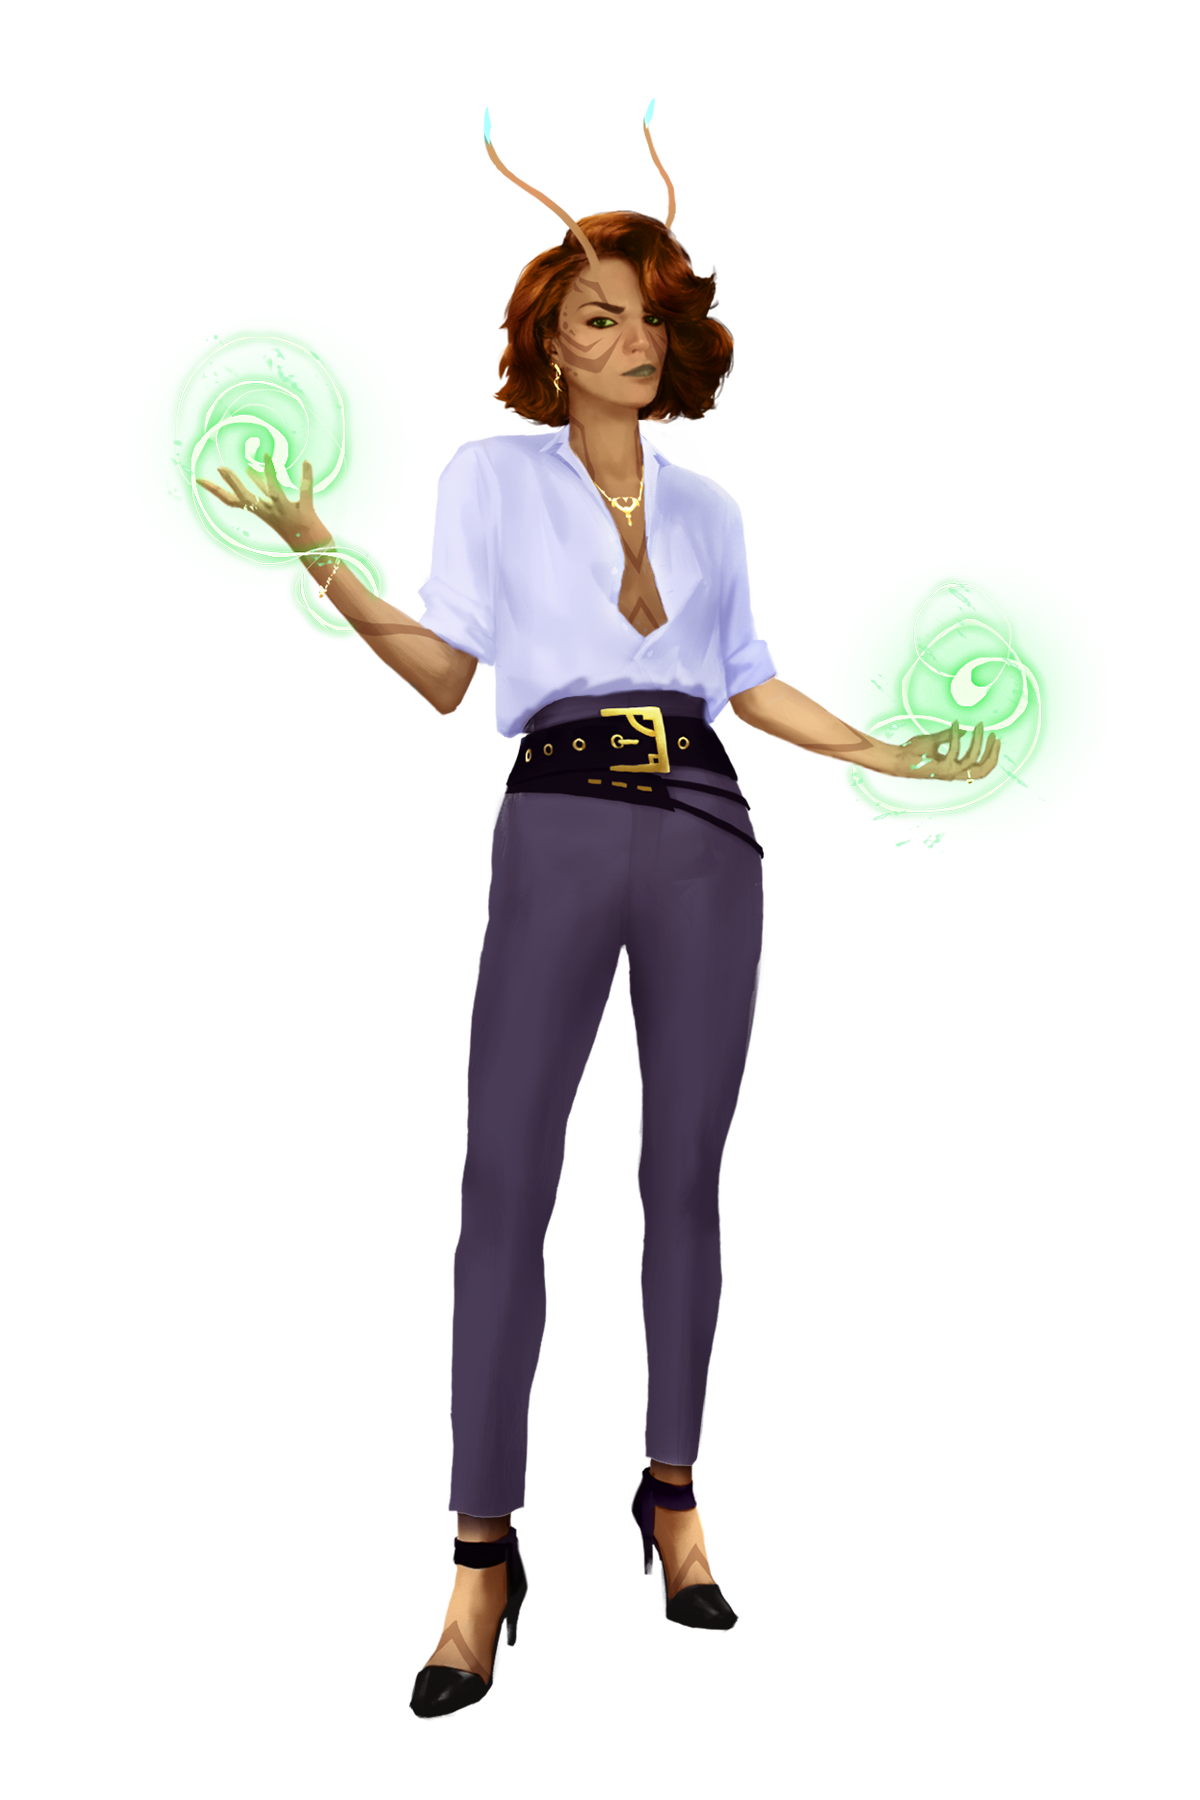 A female lashunta dressed in fashionable business attire cradles magical energy in her outstretched hands.